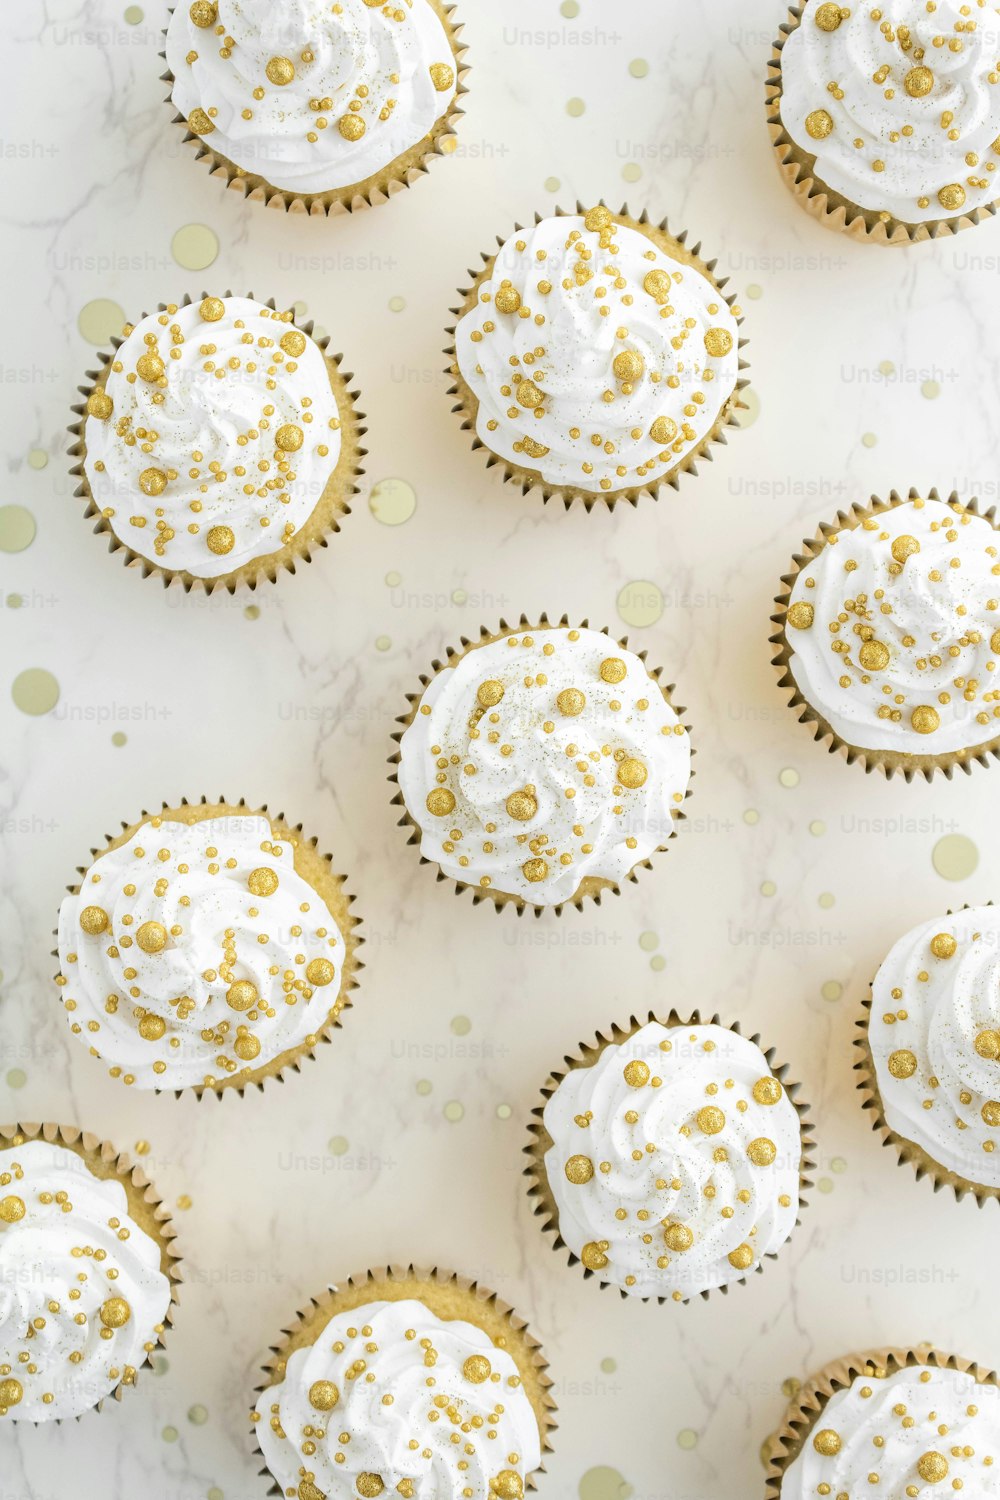 cupcakes with white frosting and gold sprinkles